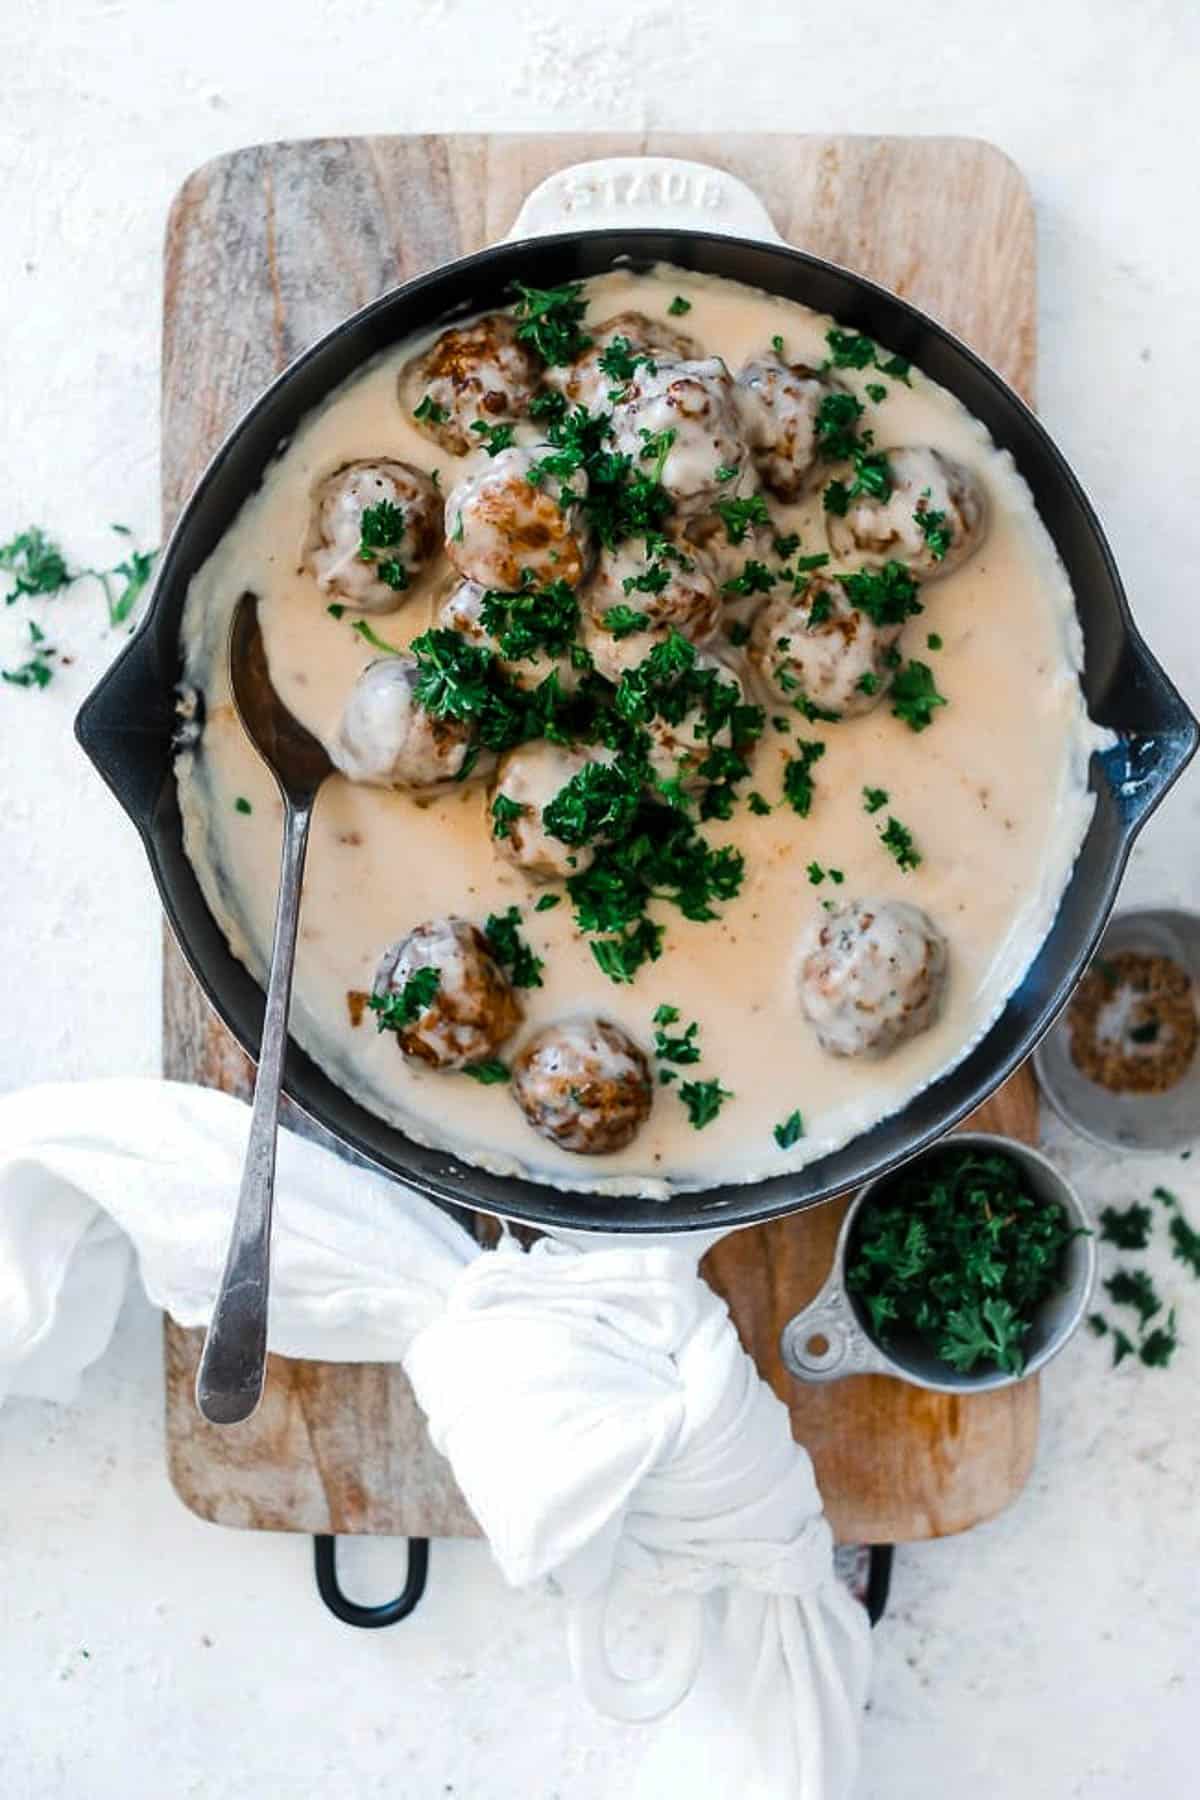 Easy Swedish meatball recipe in a cast iron skillet, atop a wooden cutting board and garnished with parsley.